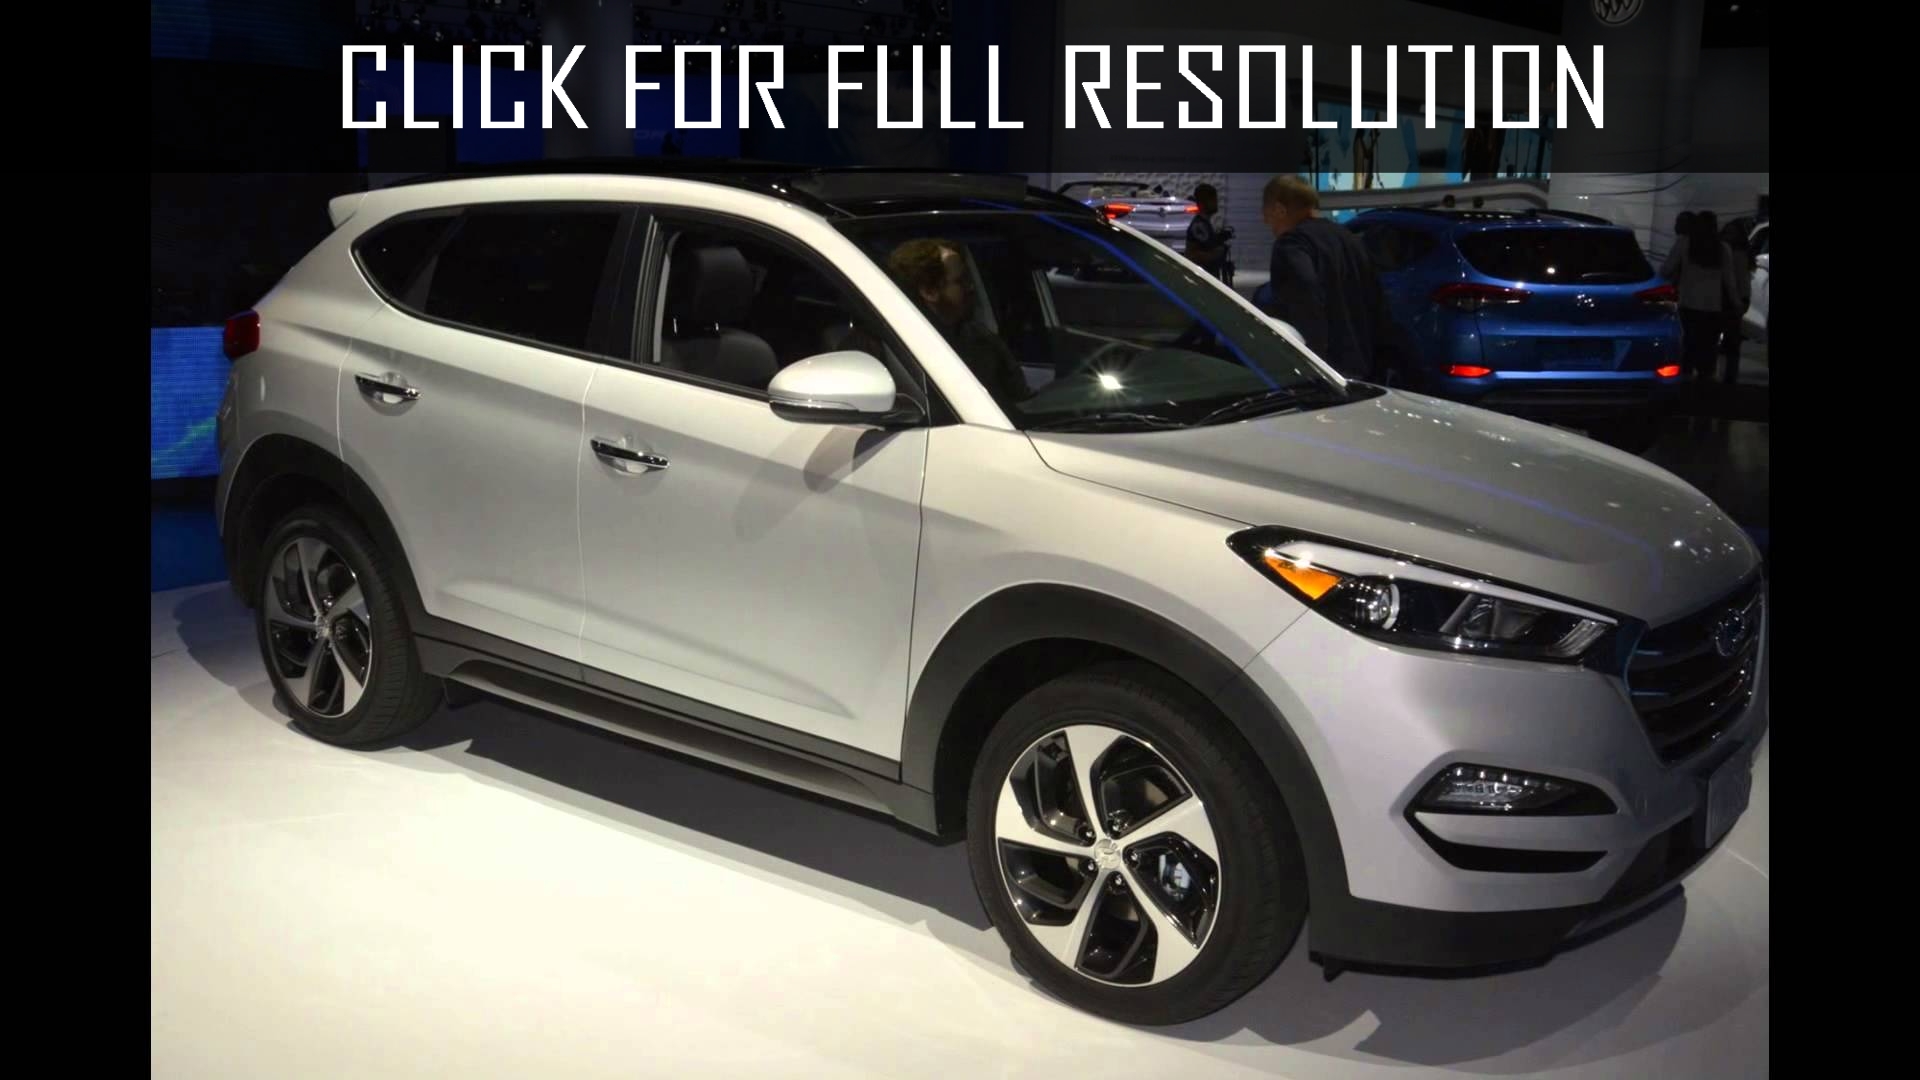 Hyundai Tucson Silver amazing photo gallery, some information and